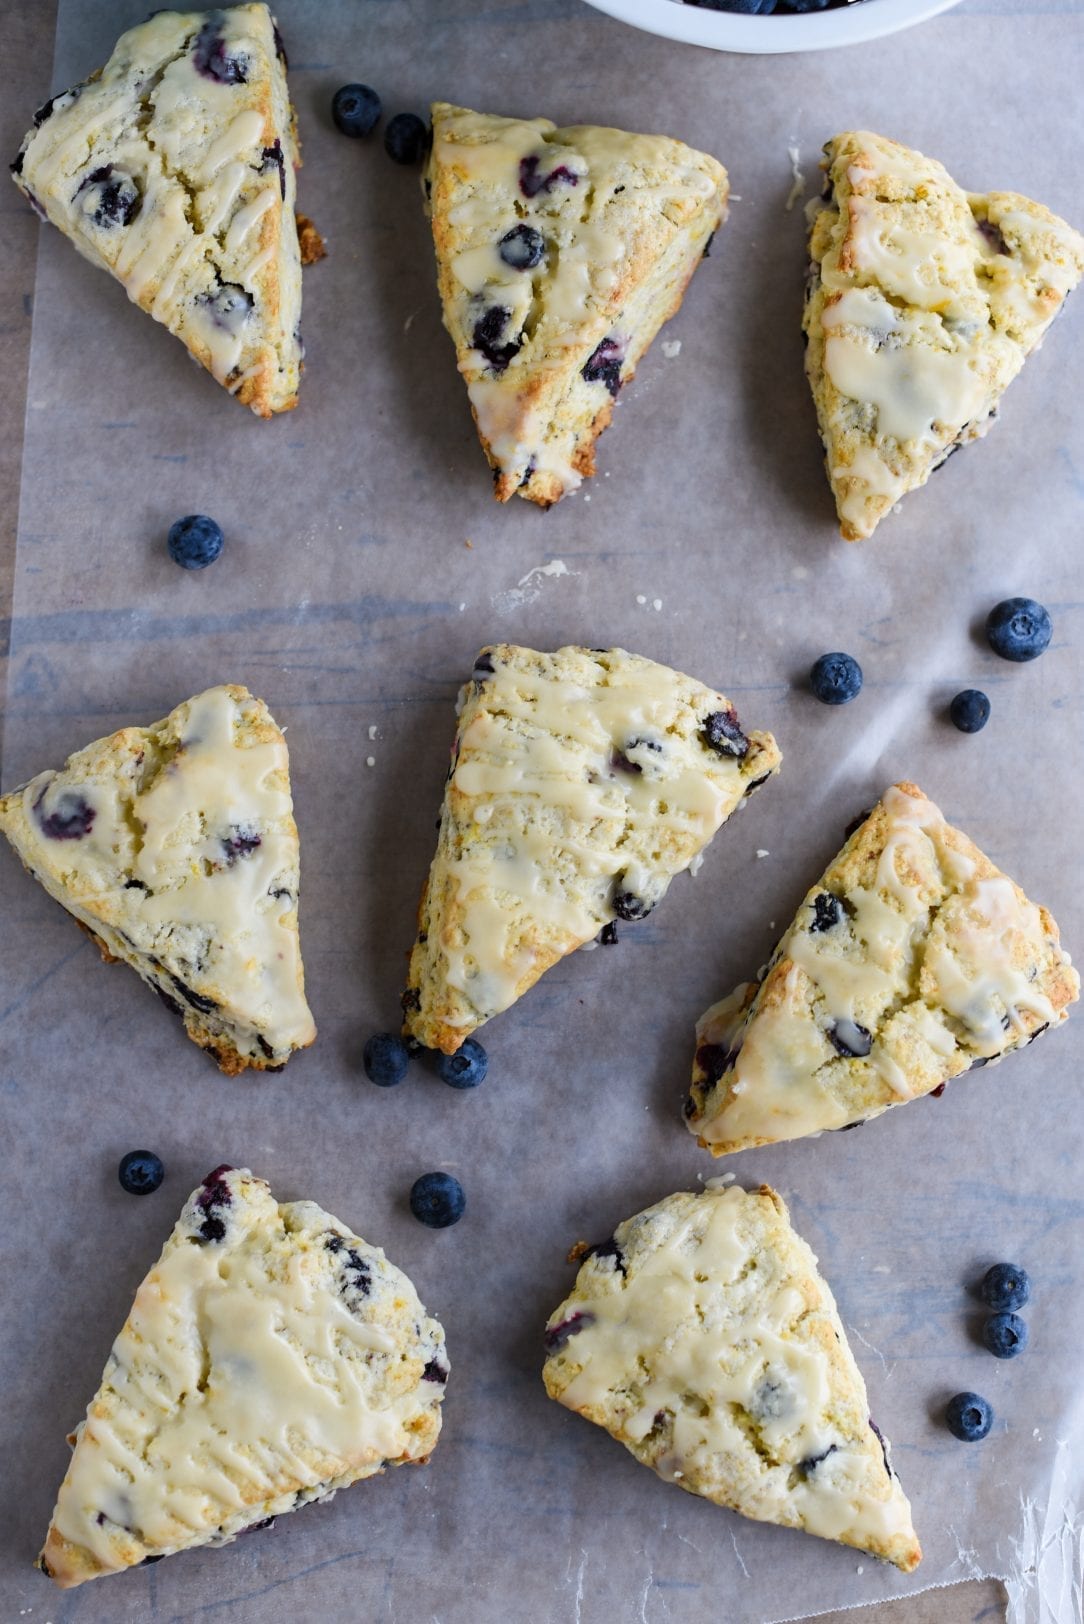 Easter might look a little different this year, but that doesn't mean brunch doesn't go on! These Blueberry Citrus Scones will be the perfect addition!